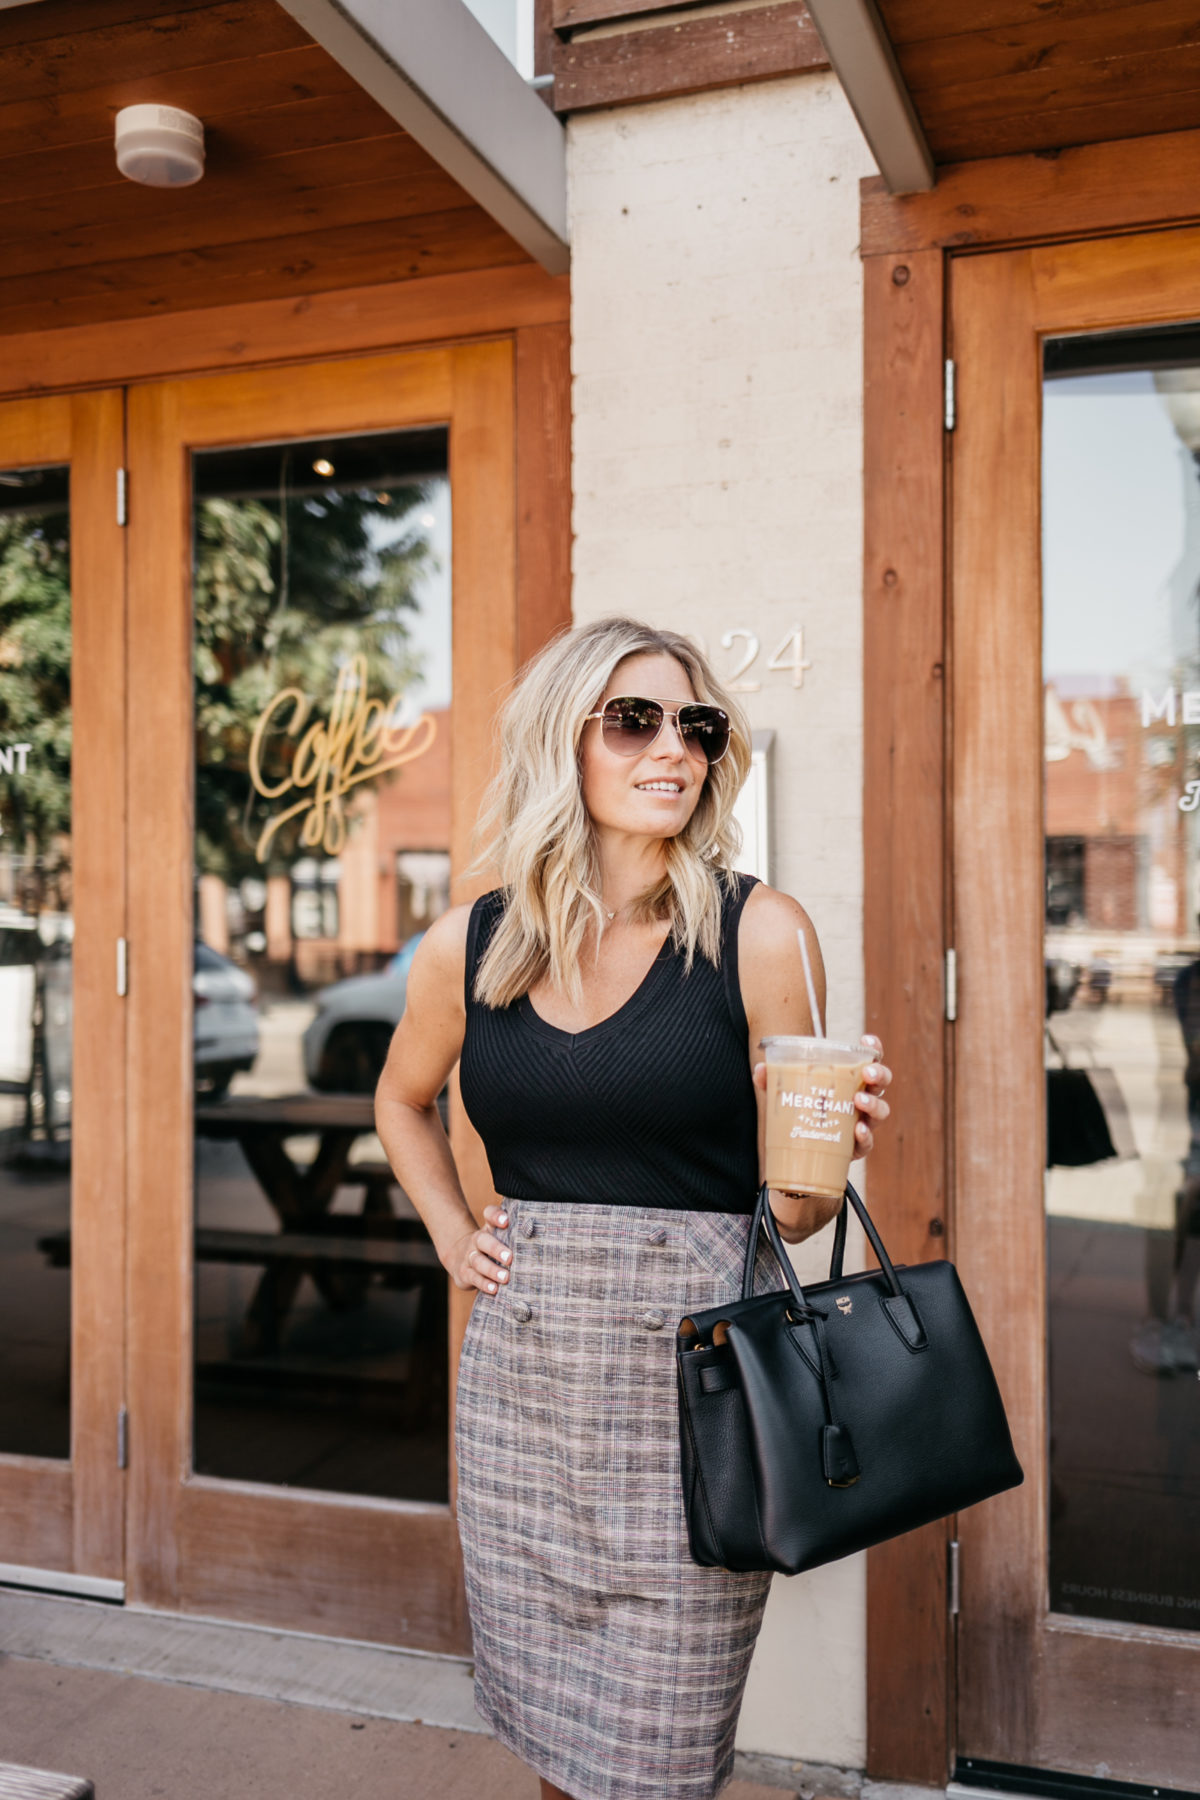 Wondering how to stay organized? Brooke thinks about this question in front of a coffee shop